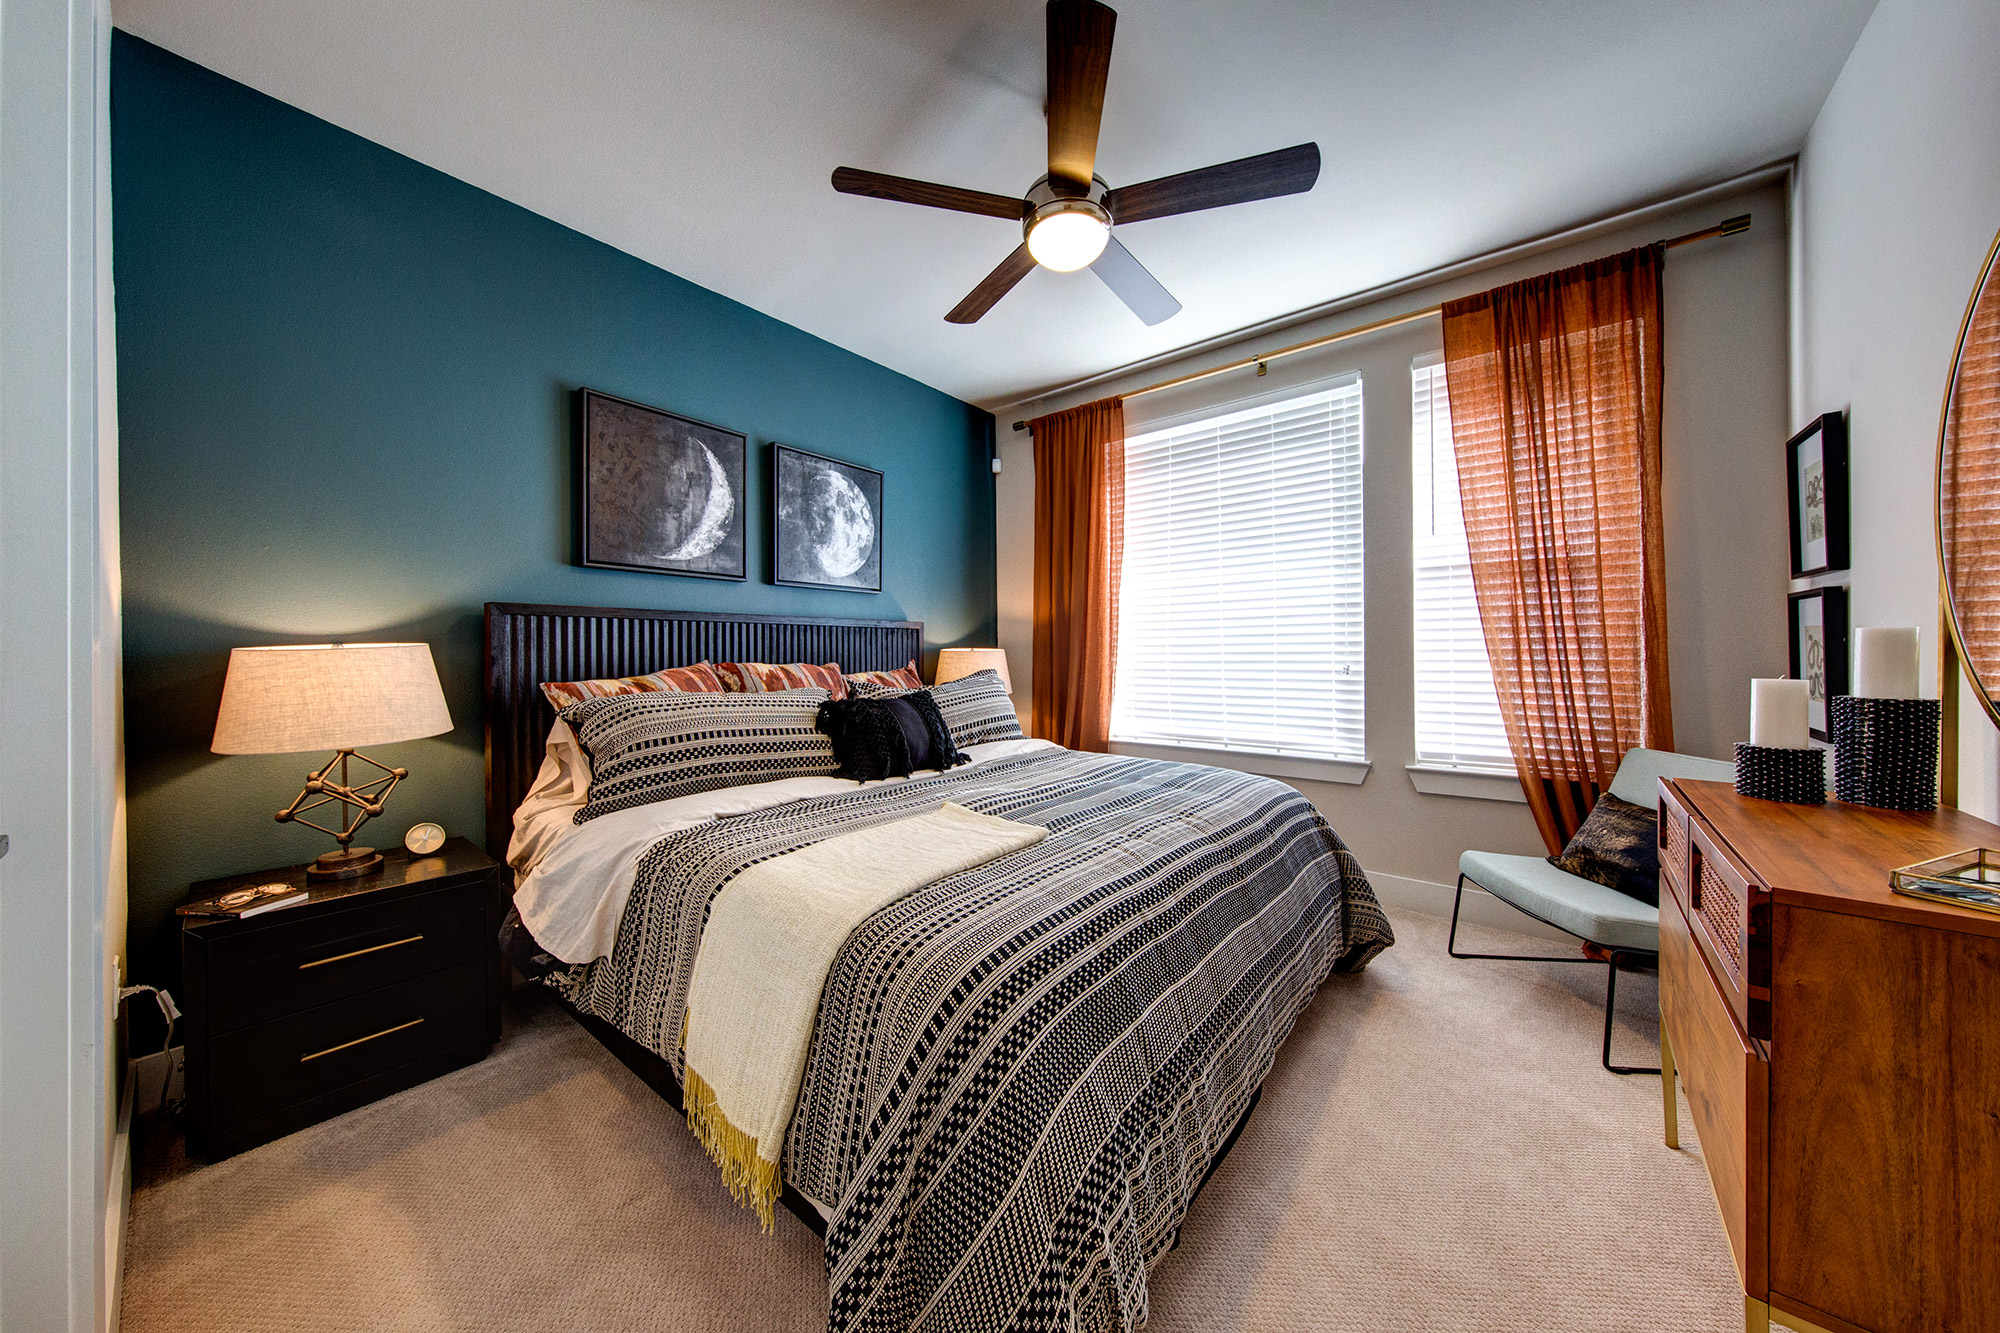 Bedroom with large windows, plush carpeting, ceiling fan, accent wall and modern bedroom furniture.